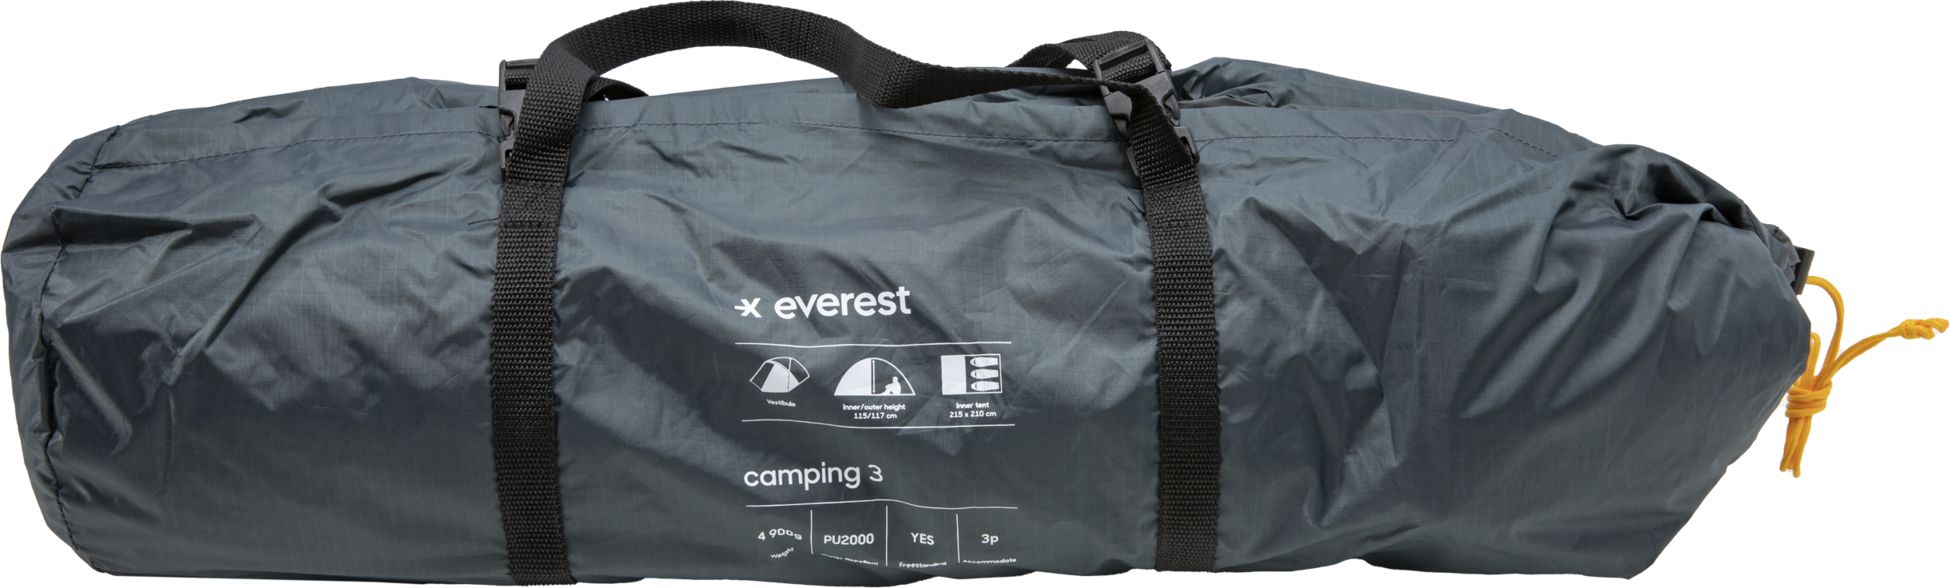 EVEREST, CAMPING 3